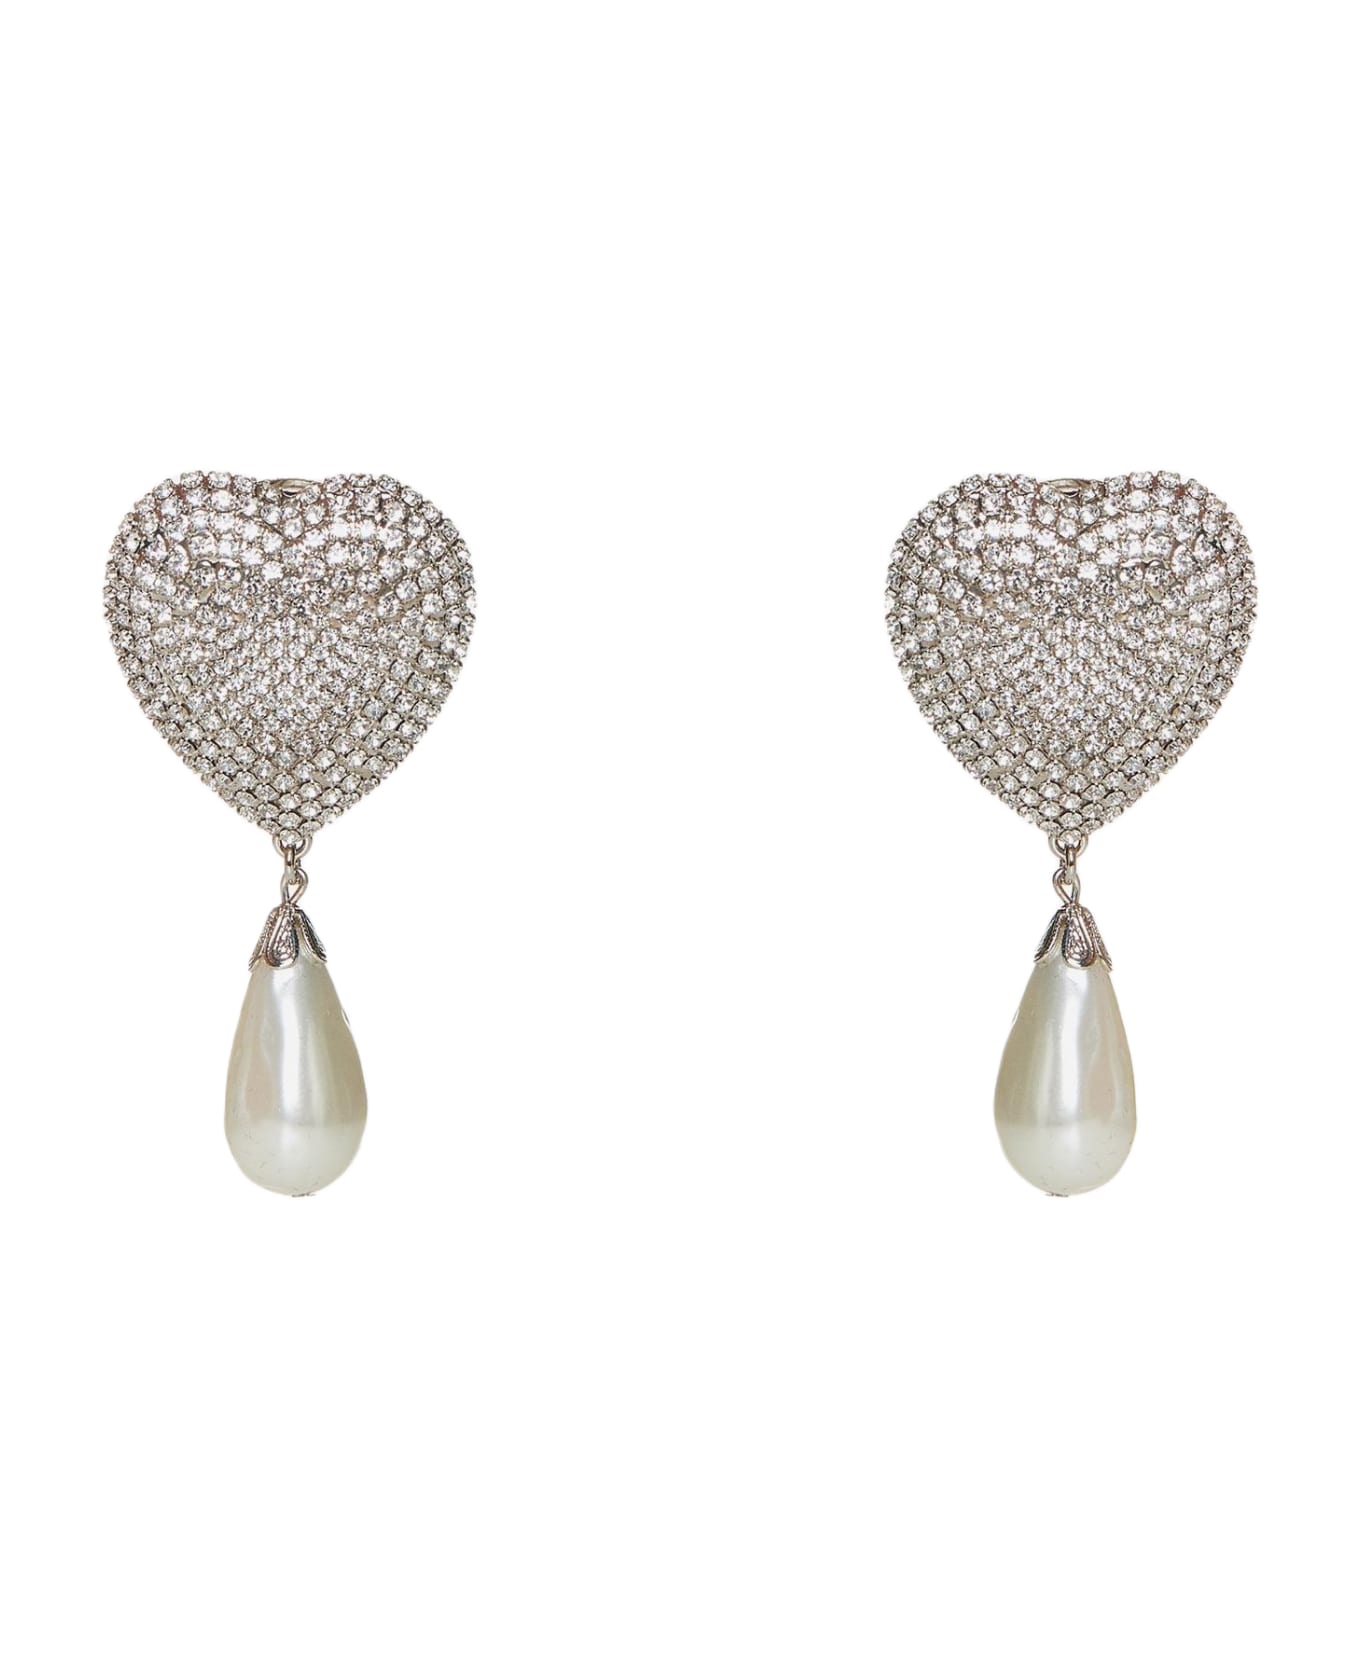 Alessandra Rich Heart Crystals And Pearl Earrings - SILVER イヤリング